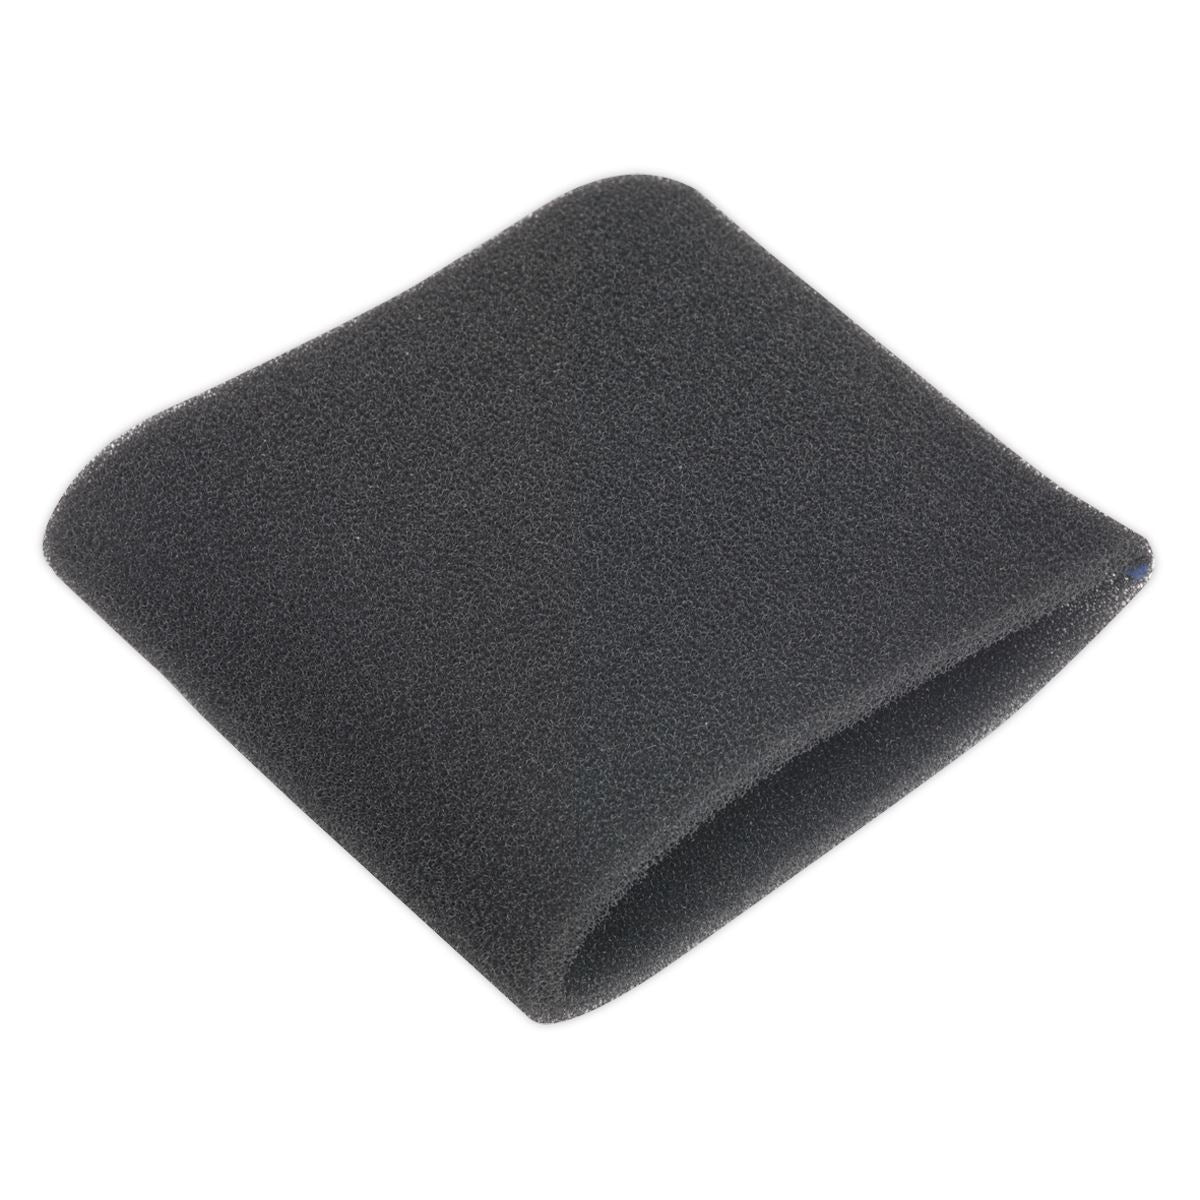 Sealey Foam Filter for PC460